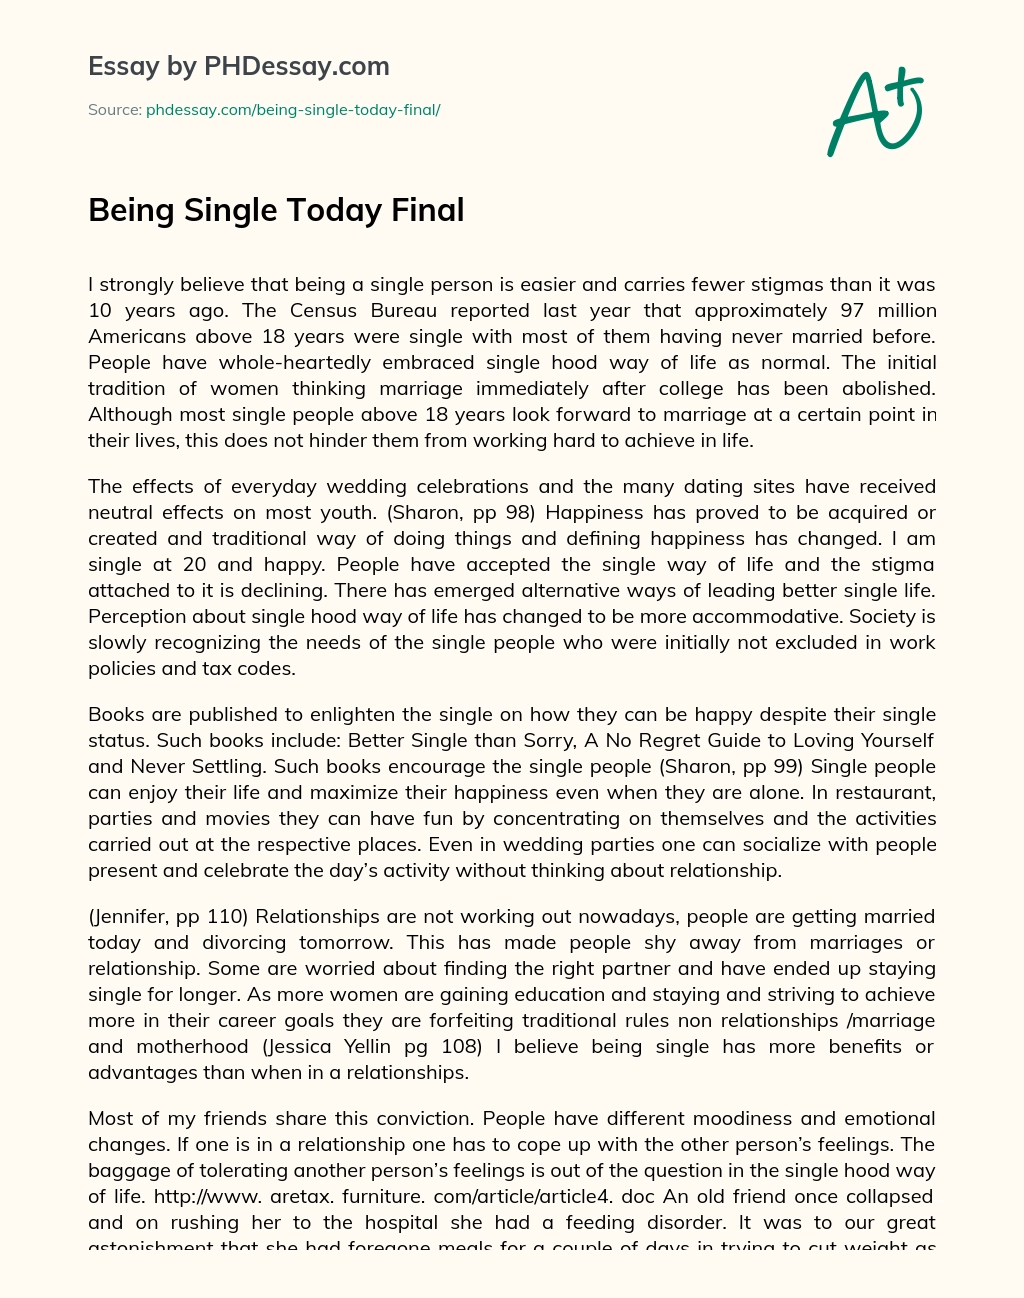 Being Single Today Final essay